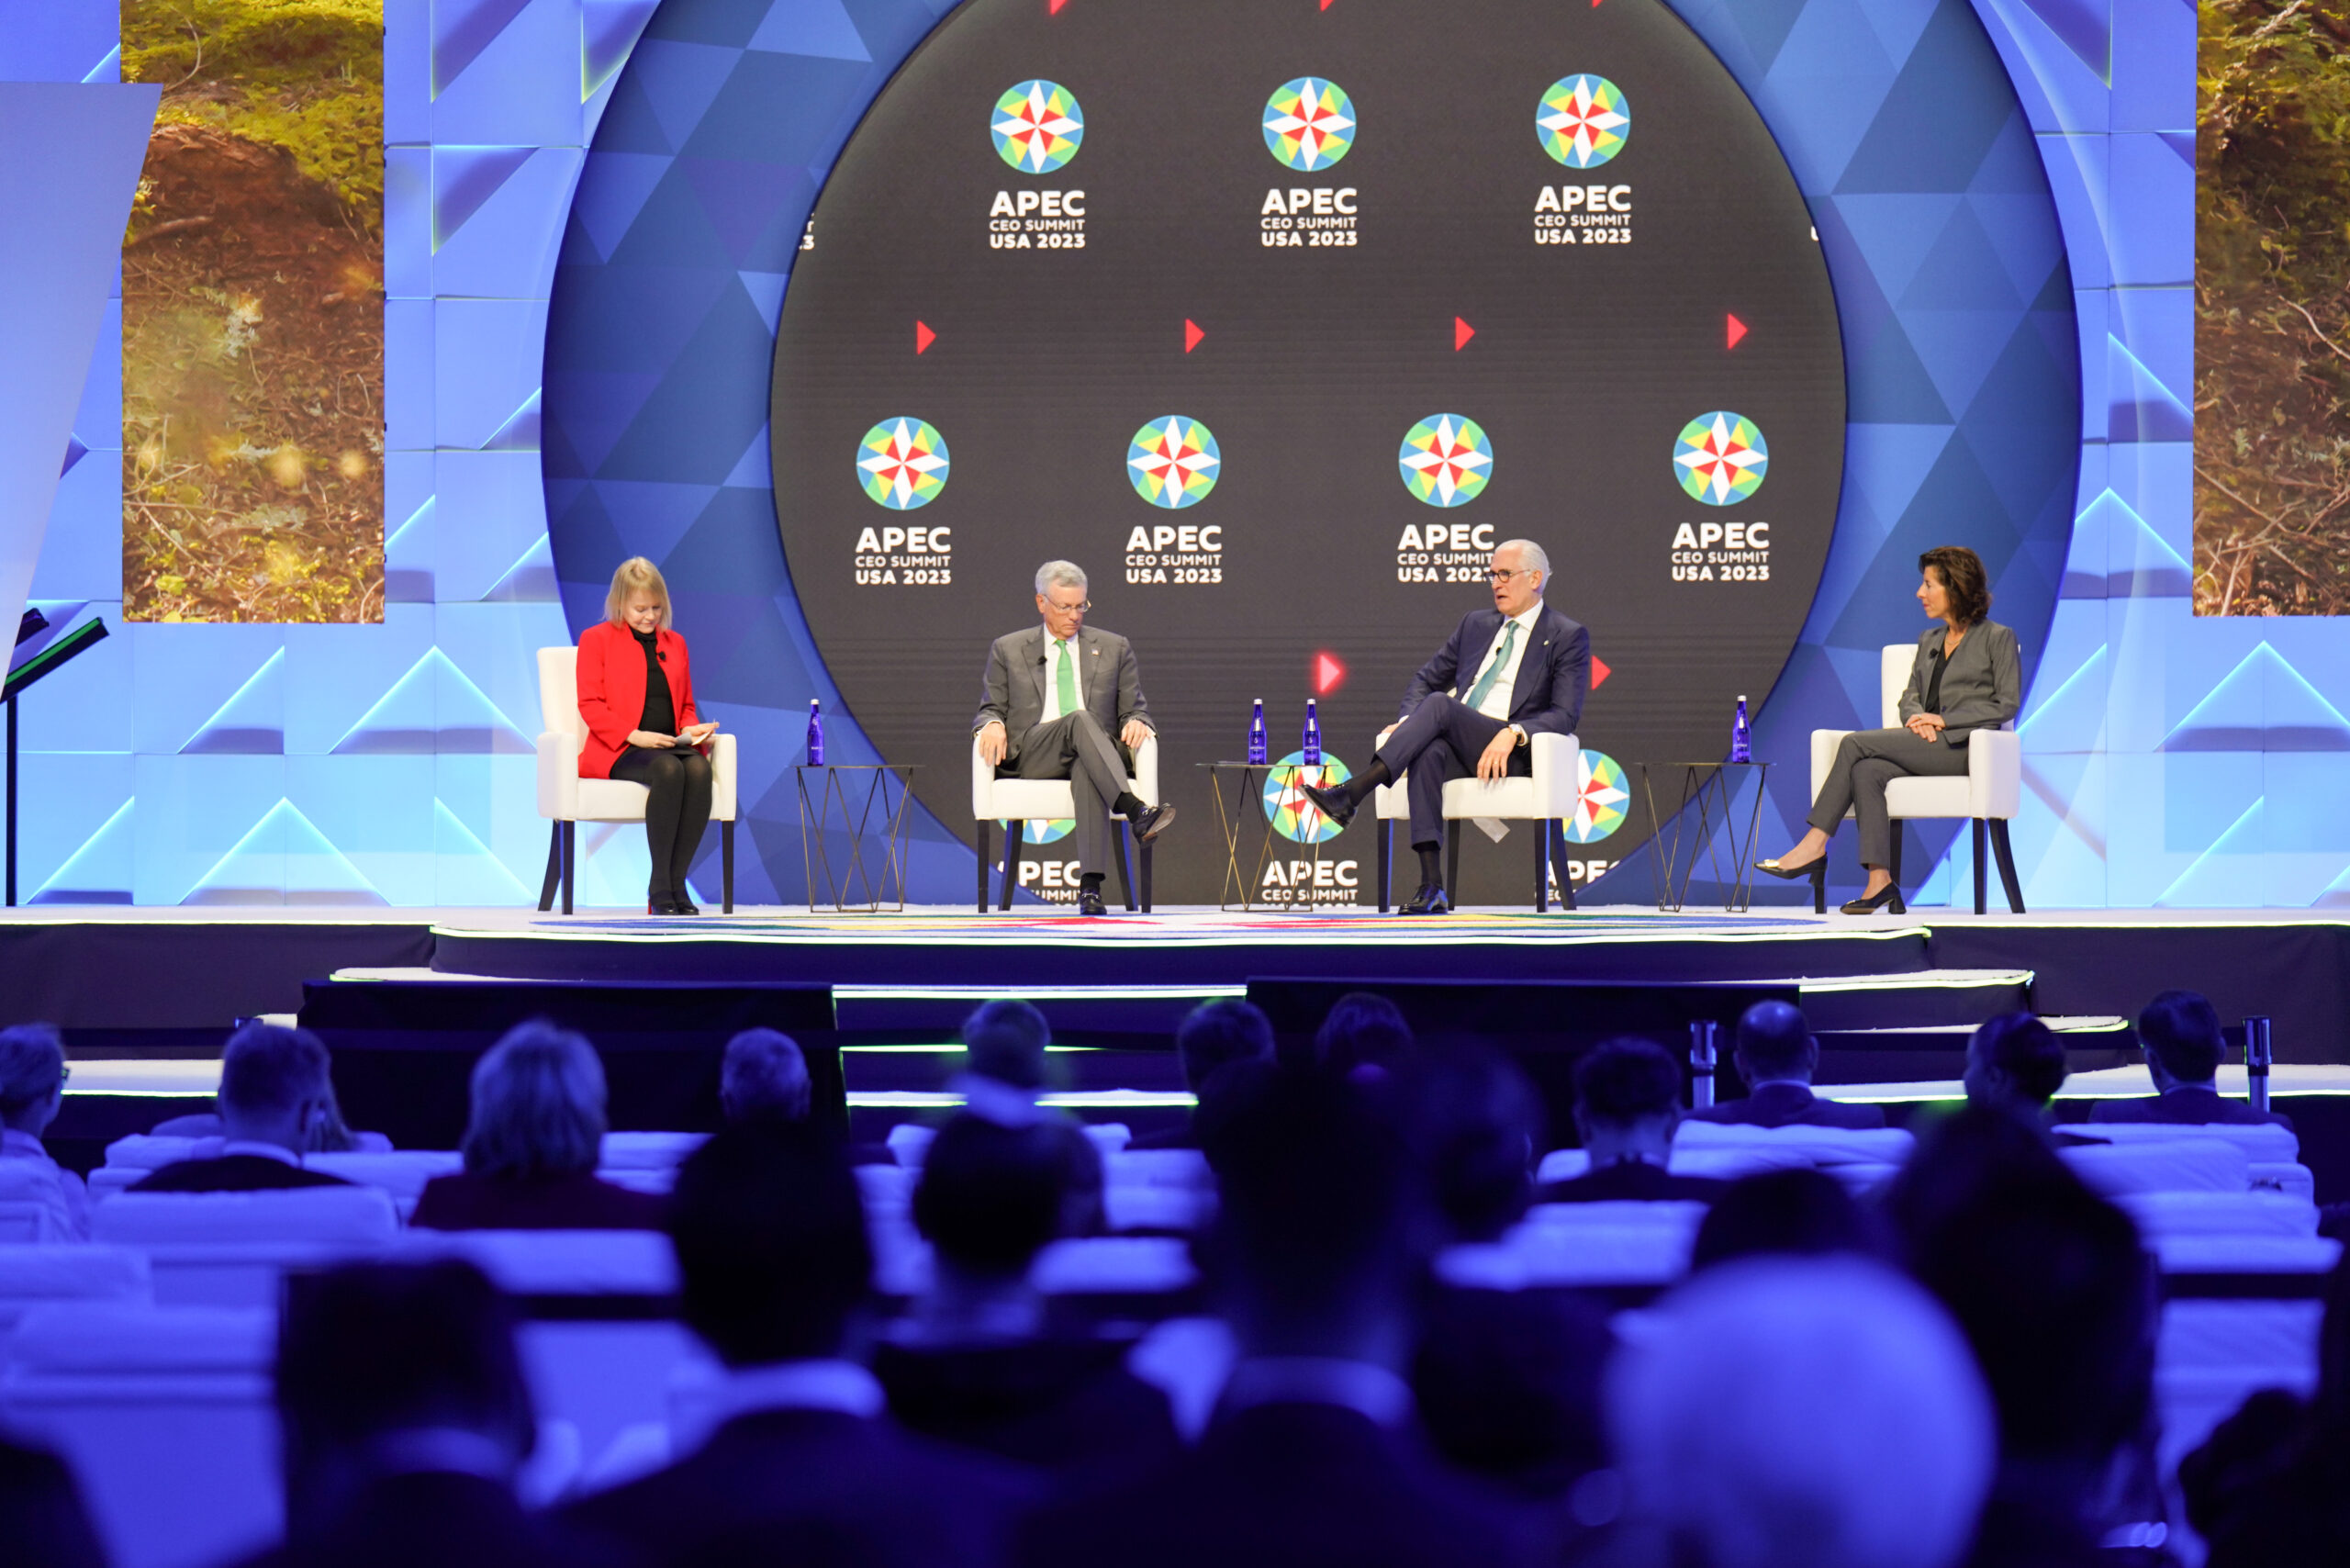 APEC Leaders Kick Off CEO Summit with Bold Visions for Inclusive Growth